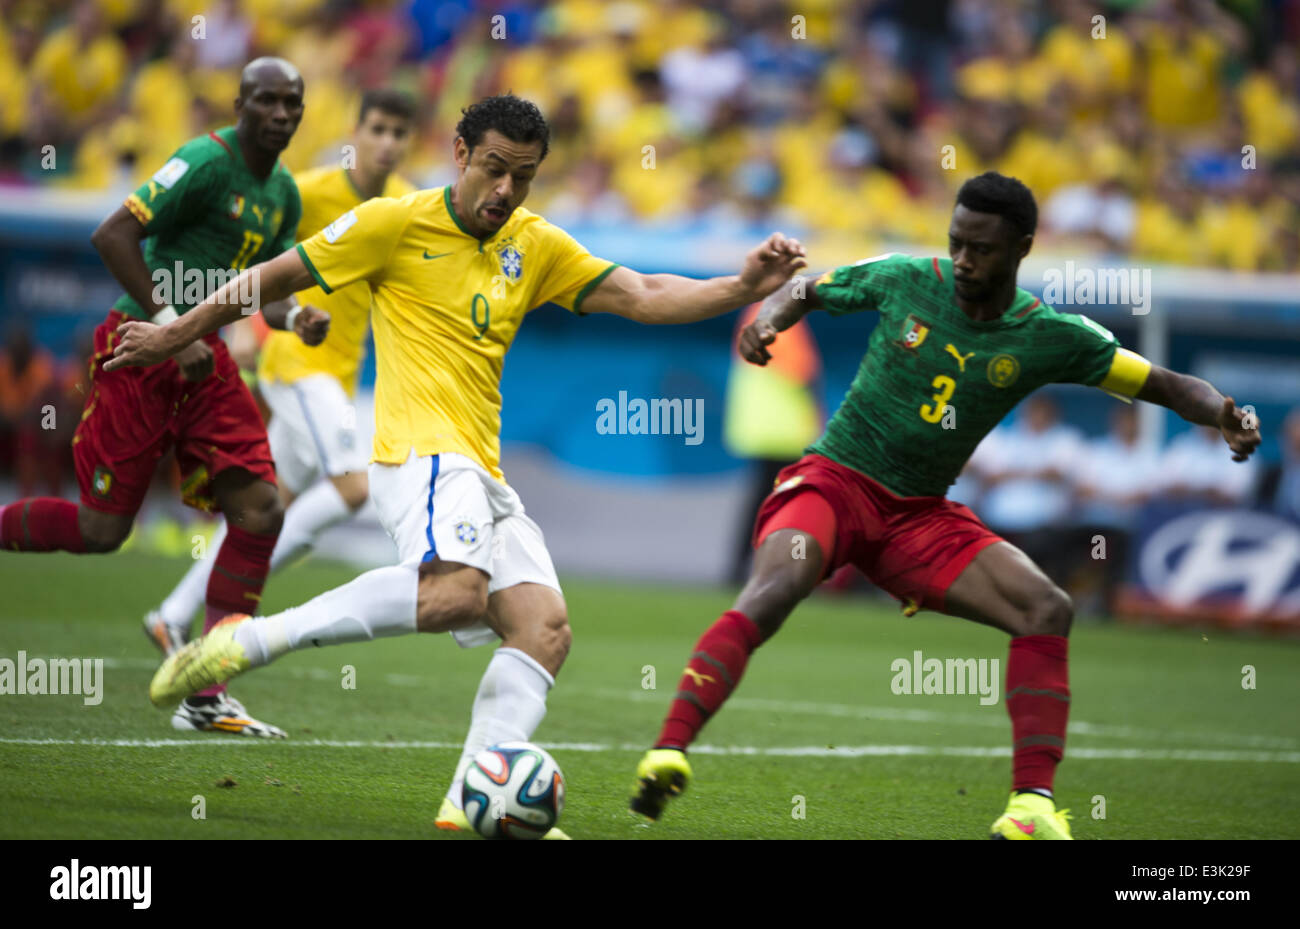 Brasilia, Brazil. 23rd June, 2014. BRASILIA, BRAZIL-23 June: Fred in the match between Cameroon and Brazil in the group stage of the 2014 World Cup, for the group A match at the Brasilia National Stadium, on June 23, 2014. Photo: Urbanandsport /Nurphoto Credit:  Urbanandsport/NurPhoto/ZUMAPRESS.com/Alamy Live News Stock Photo